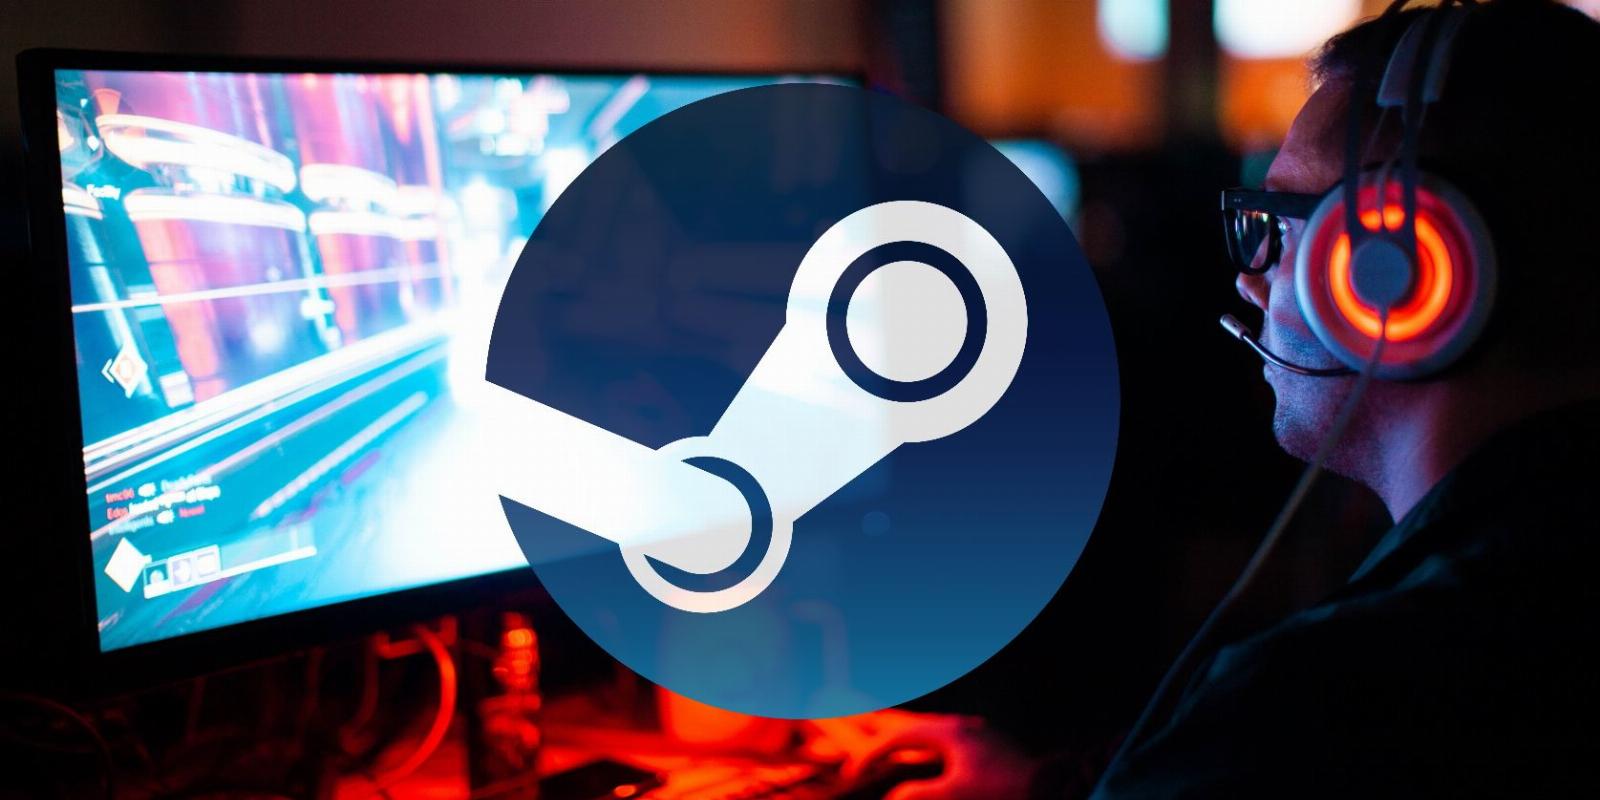 How to Fix the Steam Black Screen Issue on Windows